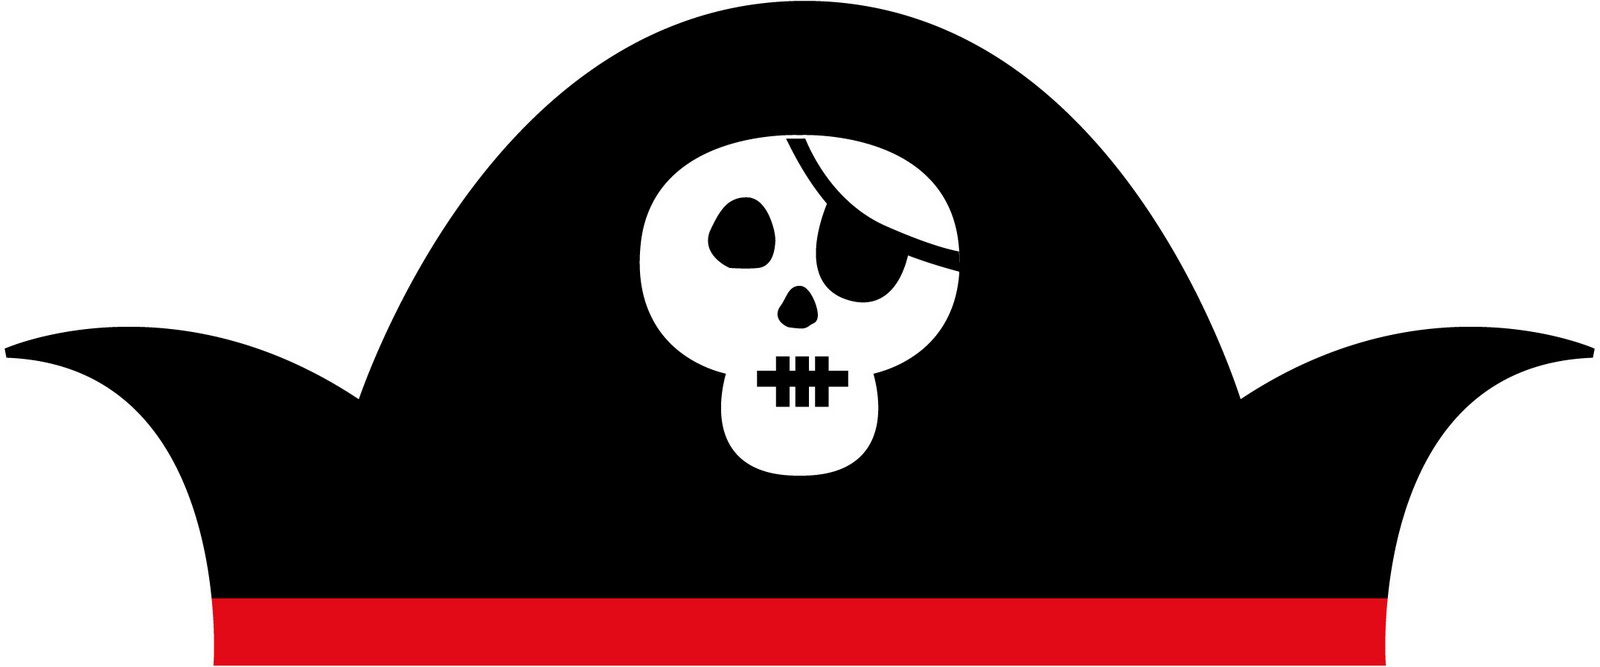 free clipart images pirates - photo #45